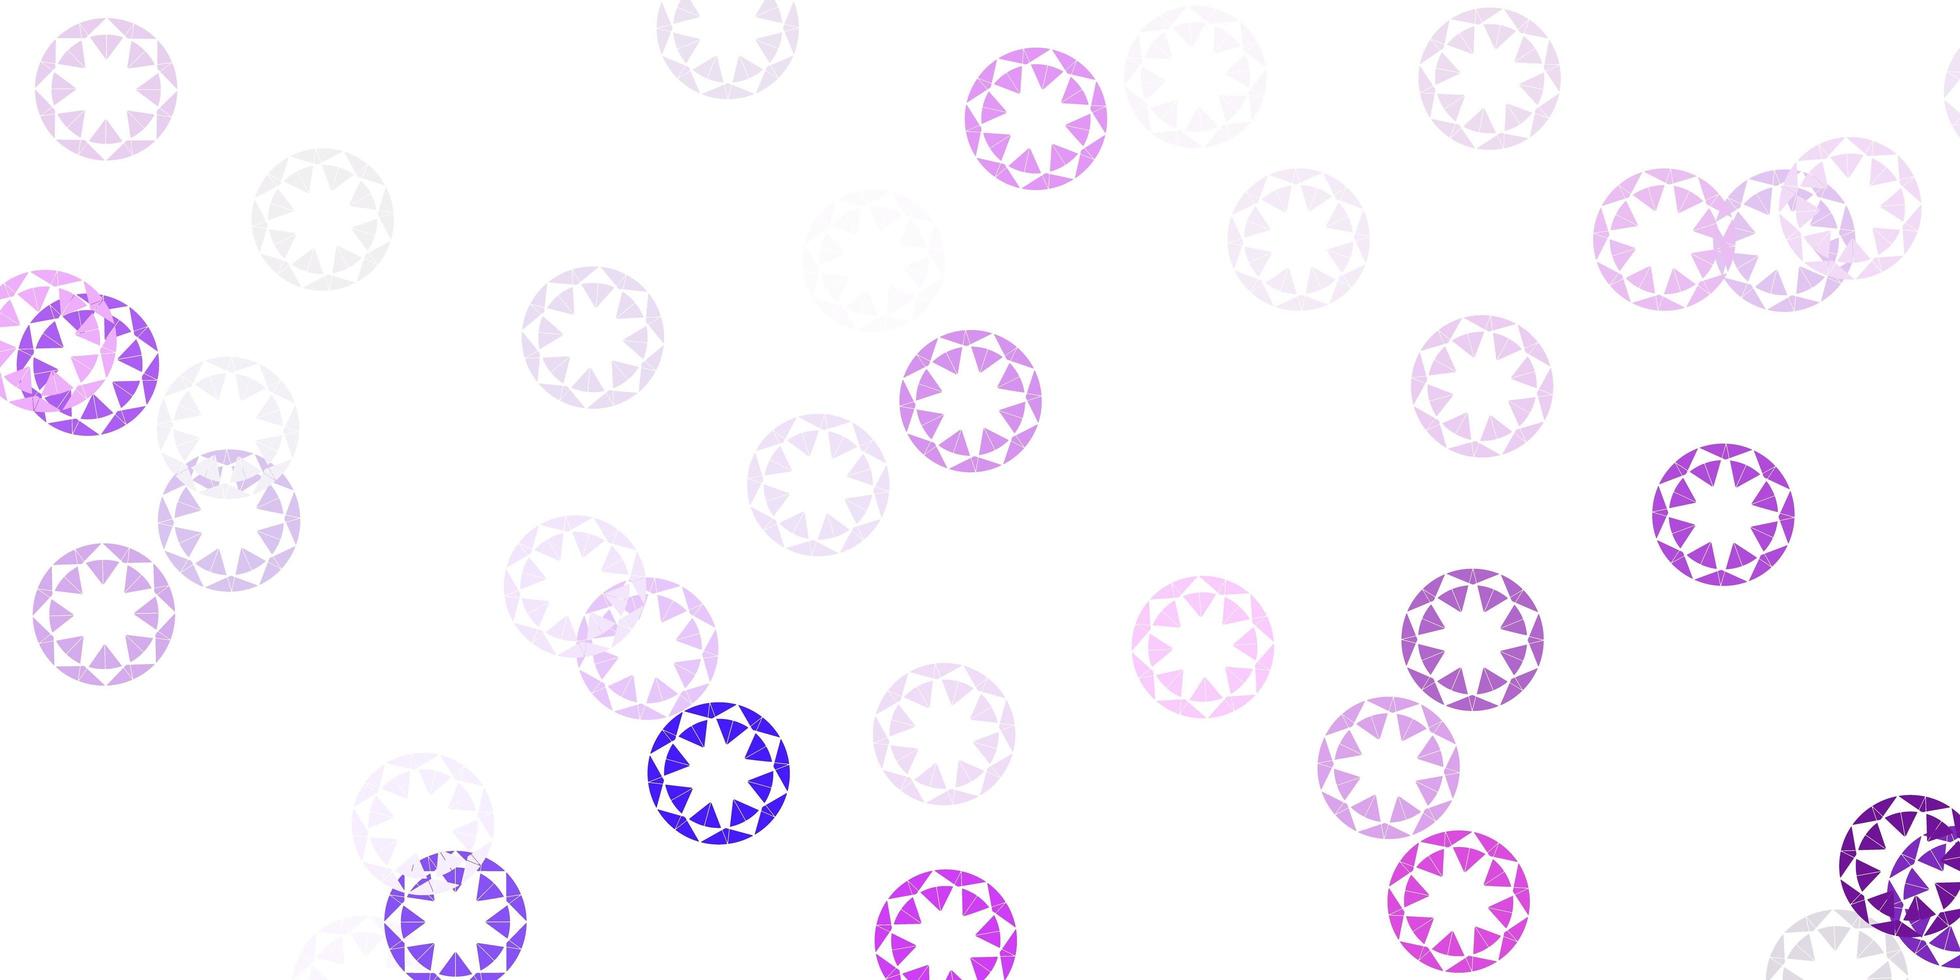 Light purple vector backdrop with dots.